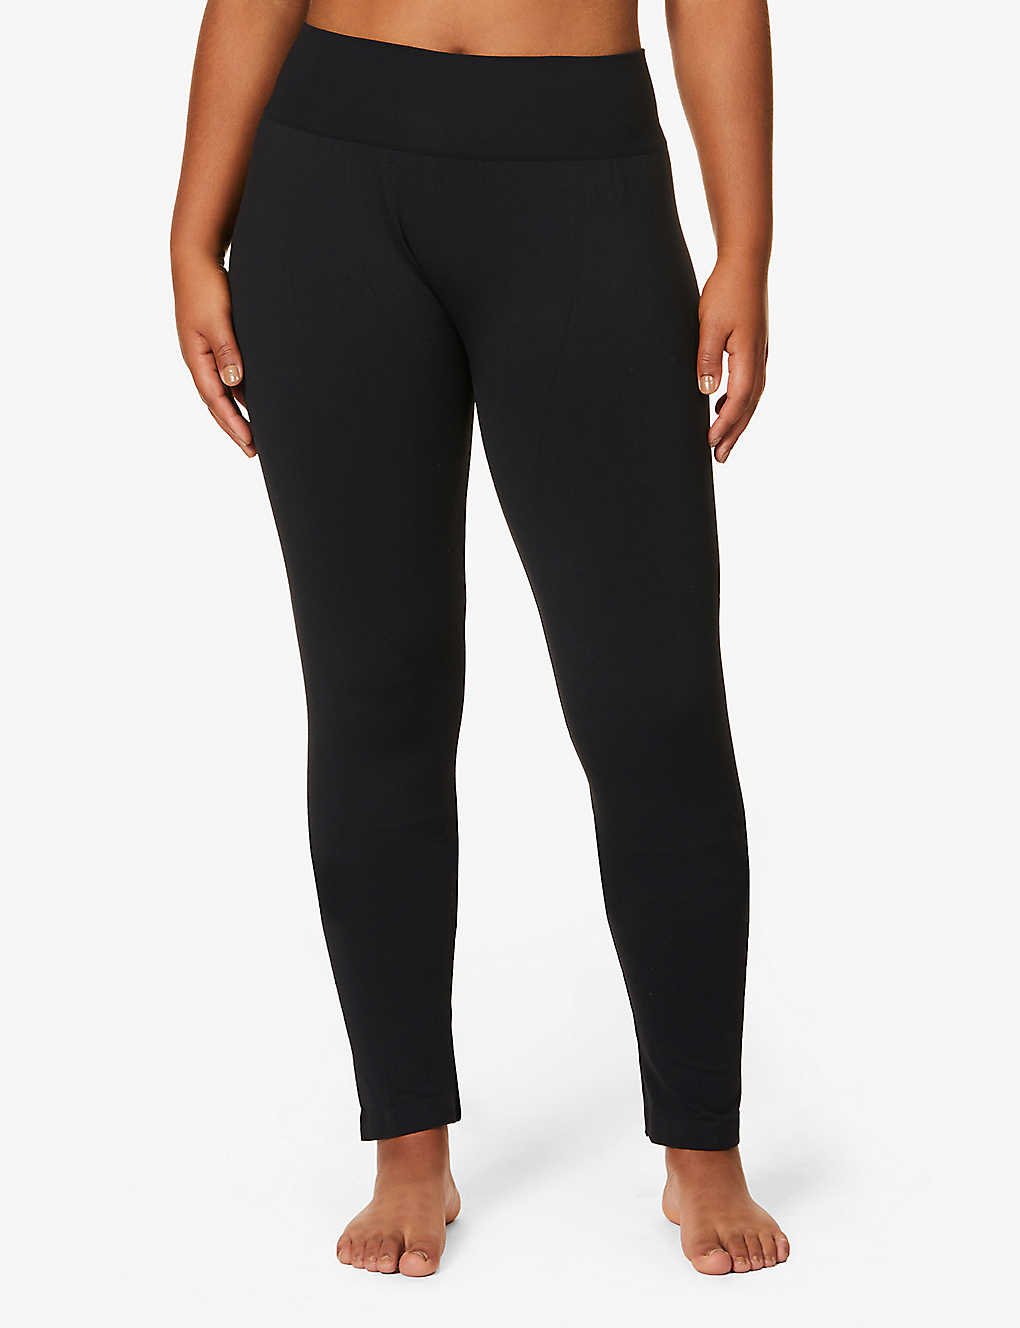 Shop Wolford Women's Black Perfect Fit High-rise Jersey Leggings